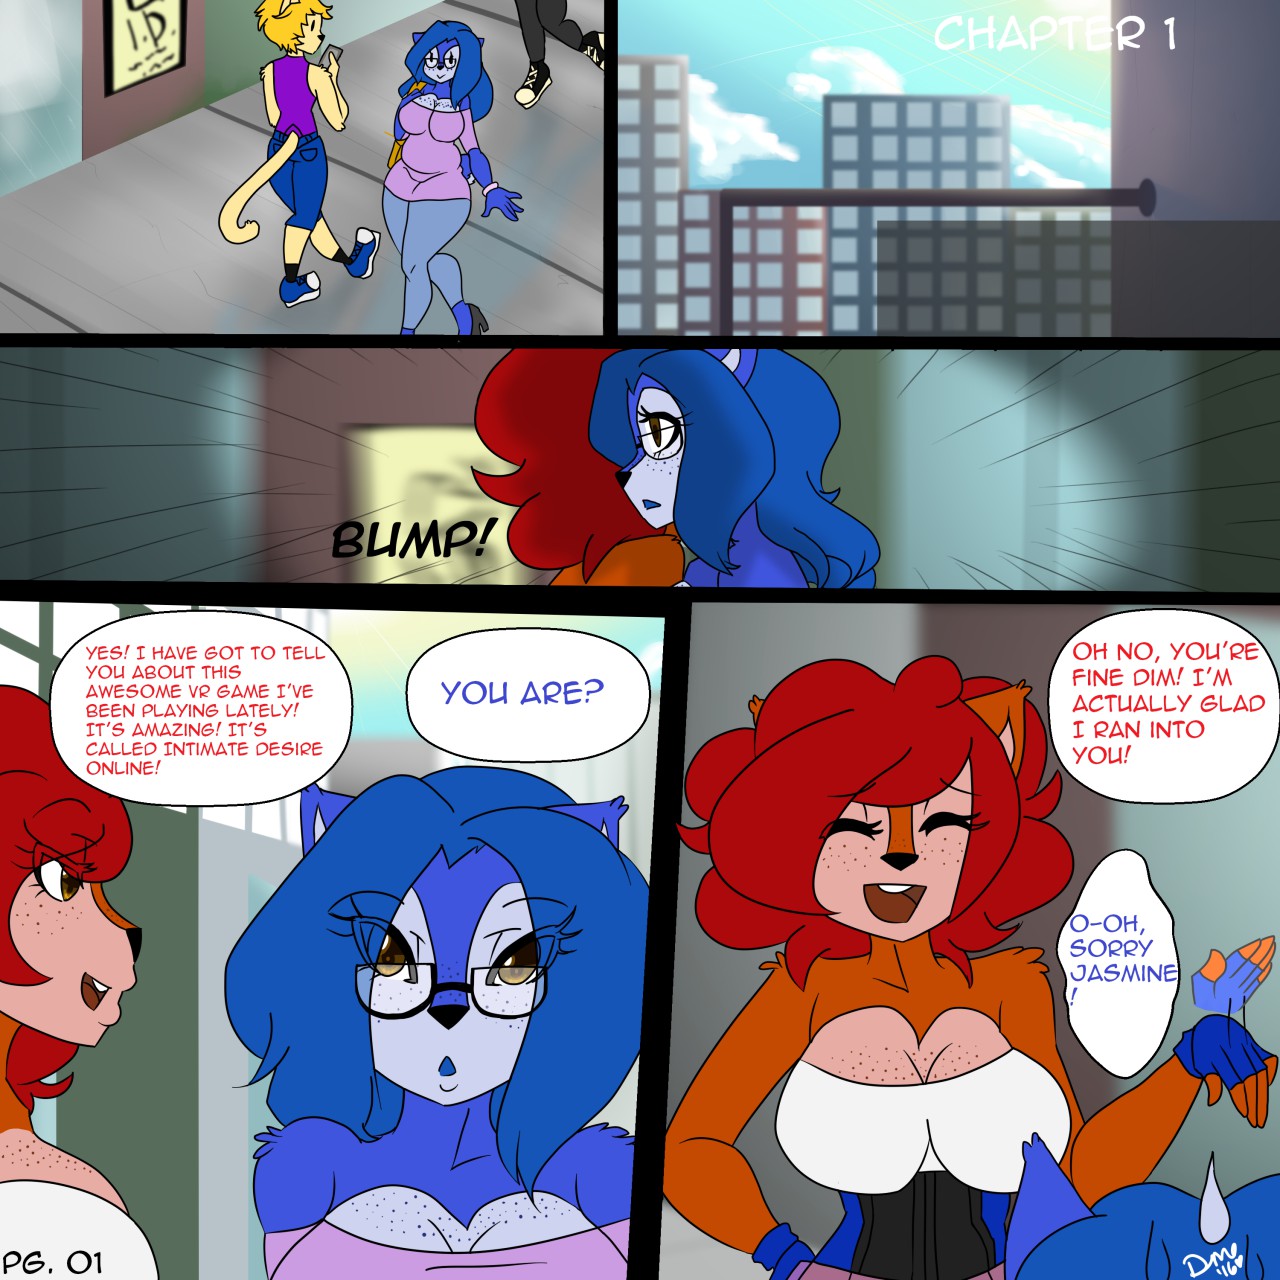 Intimate Desire Online - Chapter 1: Page 03 by 17EternalAngel -- Fur  Affinity [dot] net